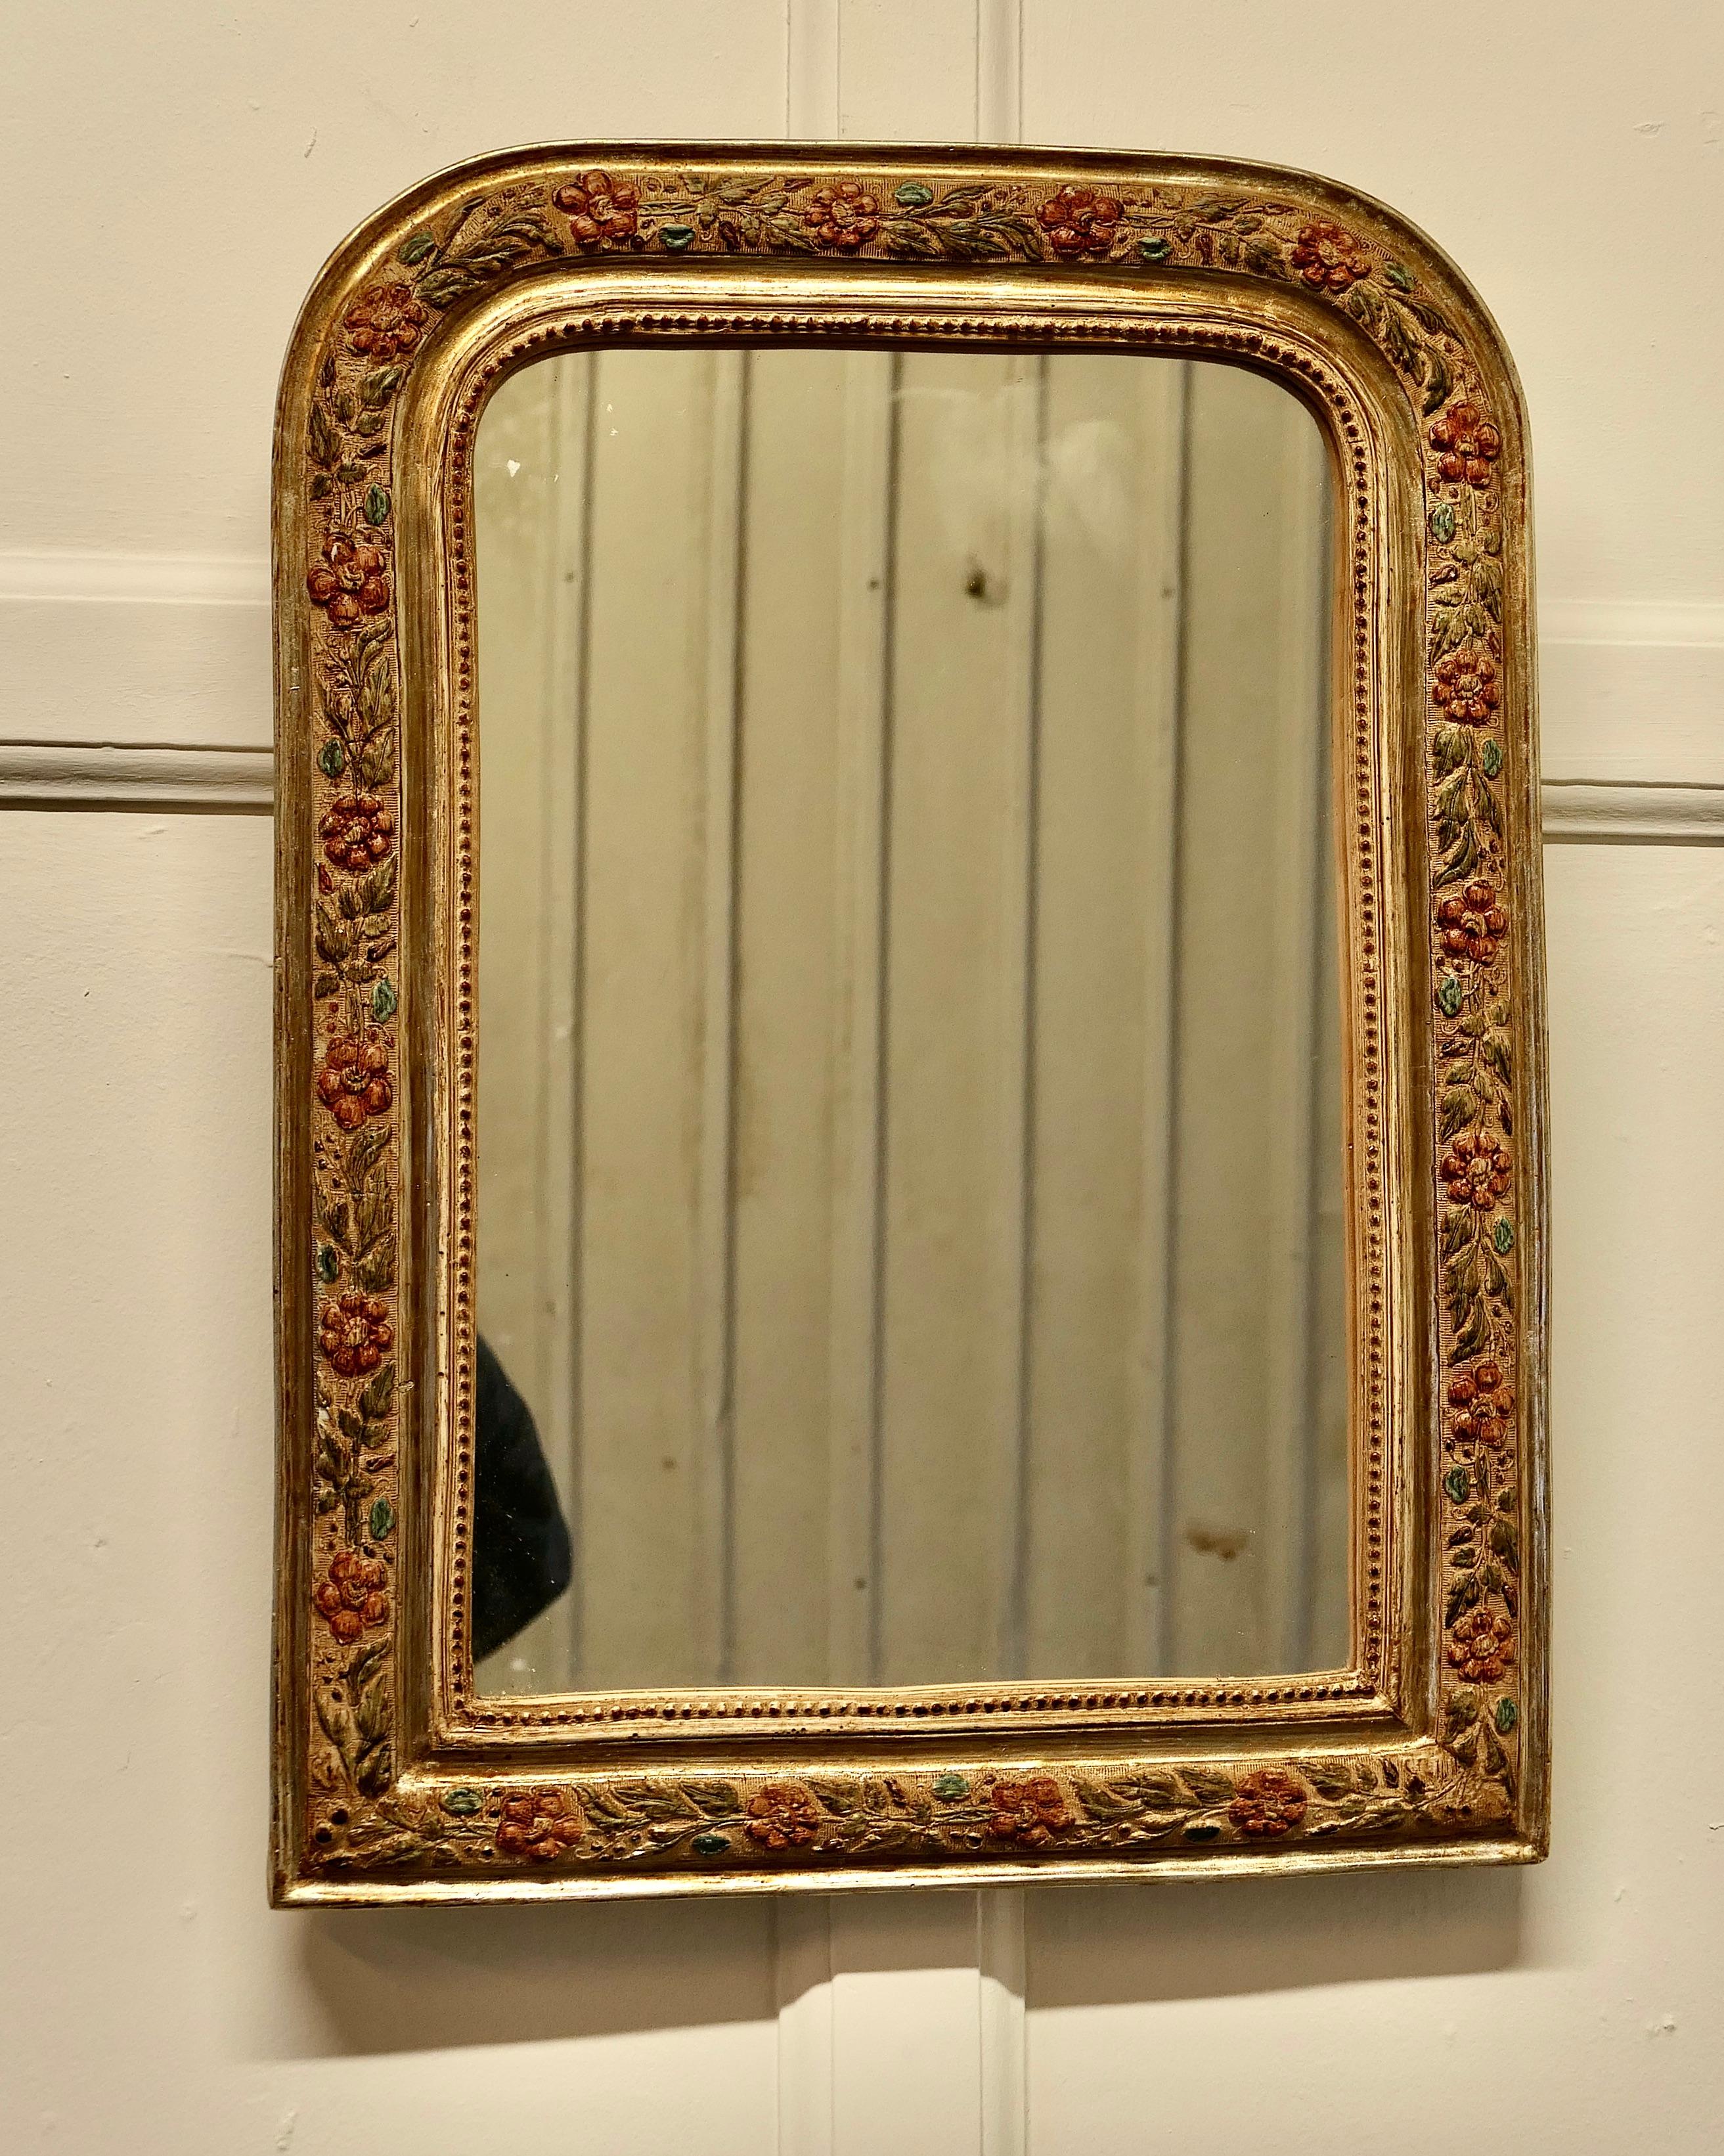 French Louis Philippe Style Painted Gilt mirror

This is a very attractive Wall Mirror an excellent example of French antique chic furnishing, the 3” mirror frame is very ornate, decorated with leaves and flowers which are painted in traditional